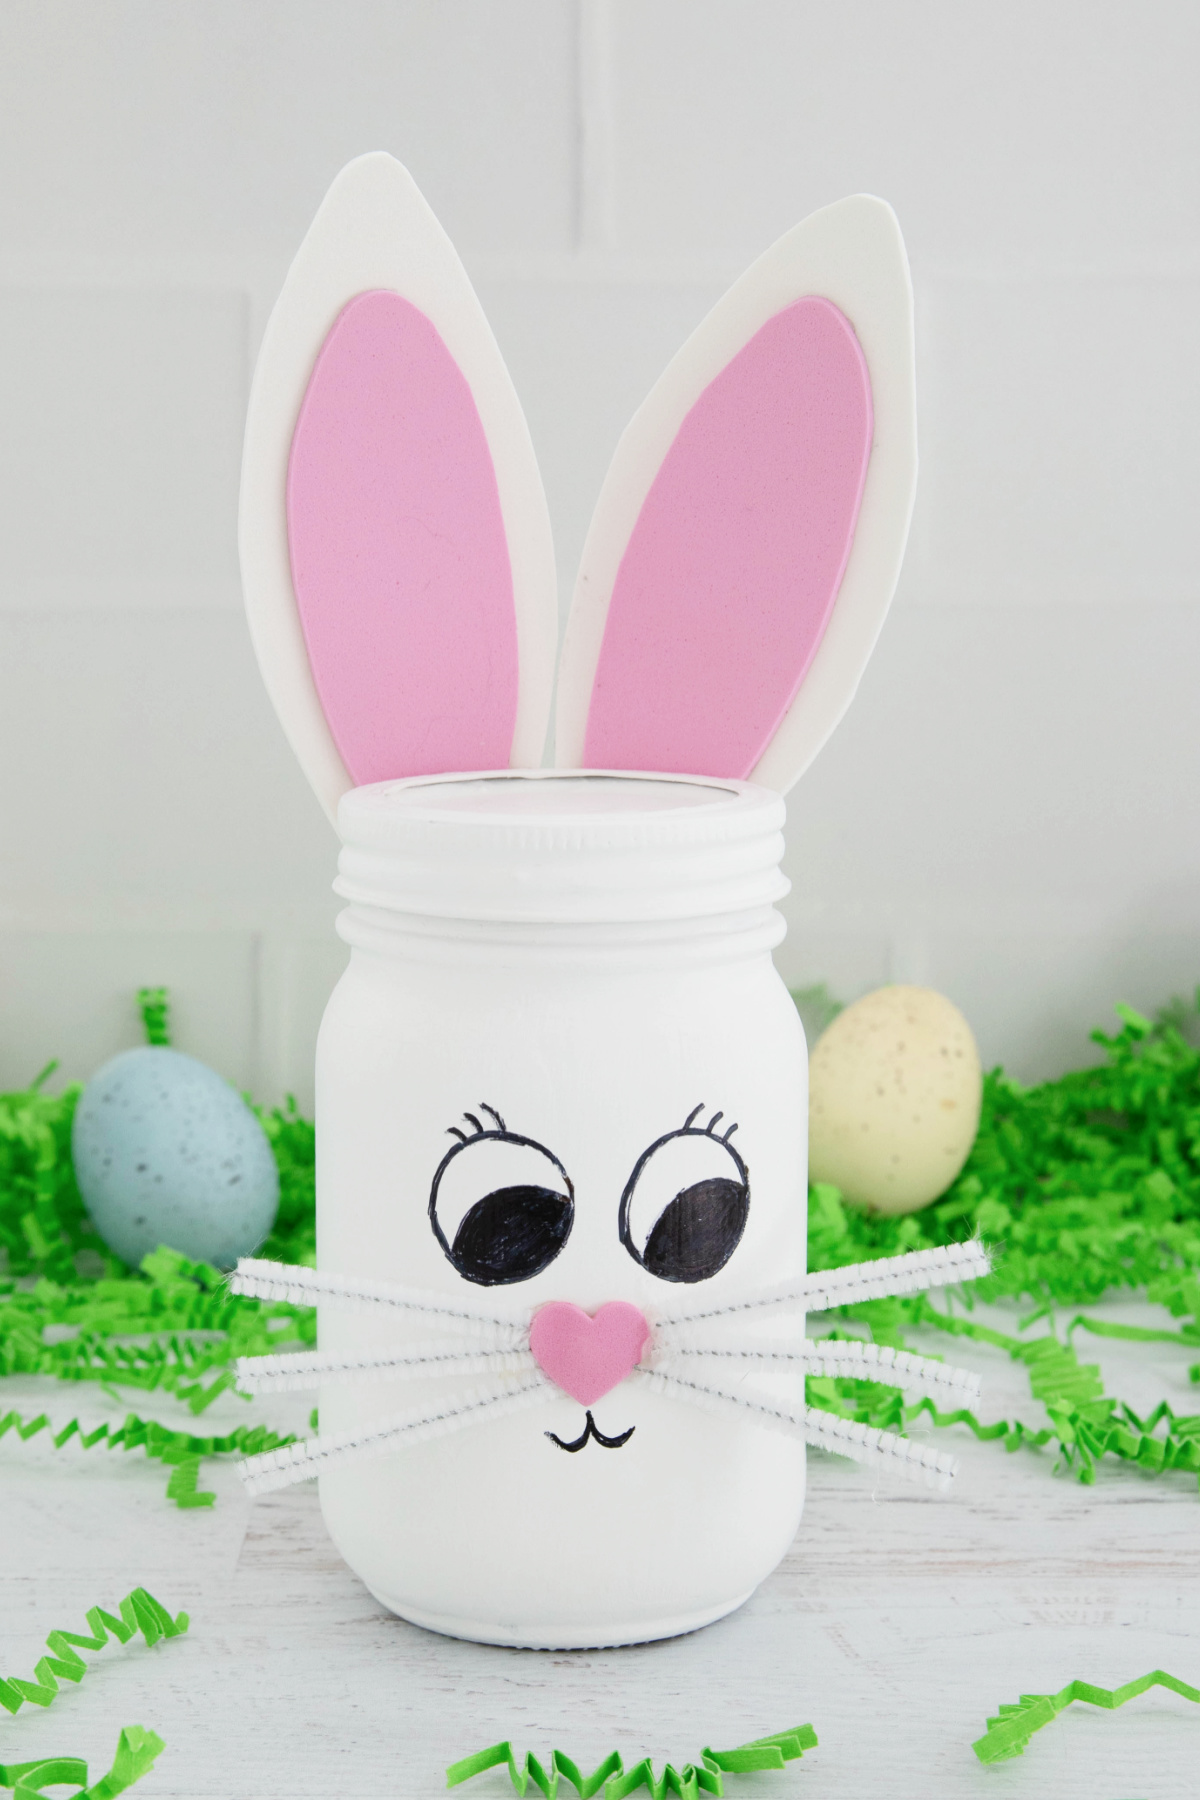 A decorative jar painted to look like a bunny with pink ears and a face, accompanied by easter eggs in the background.